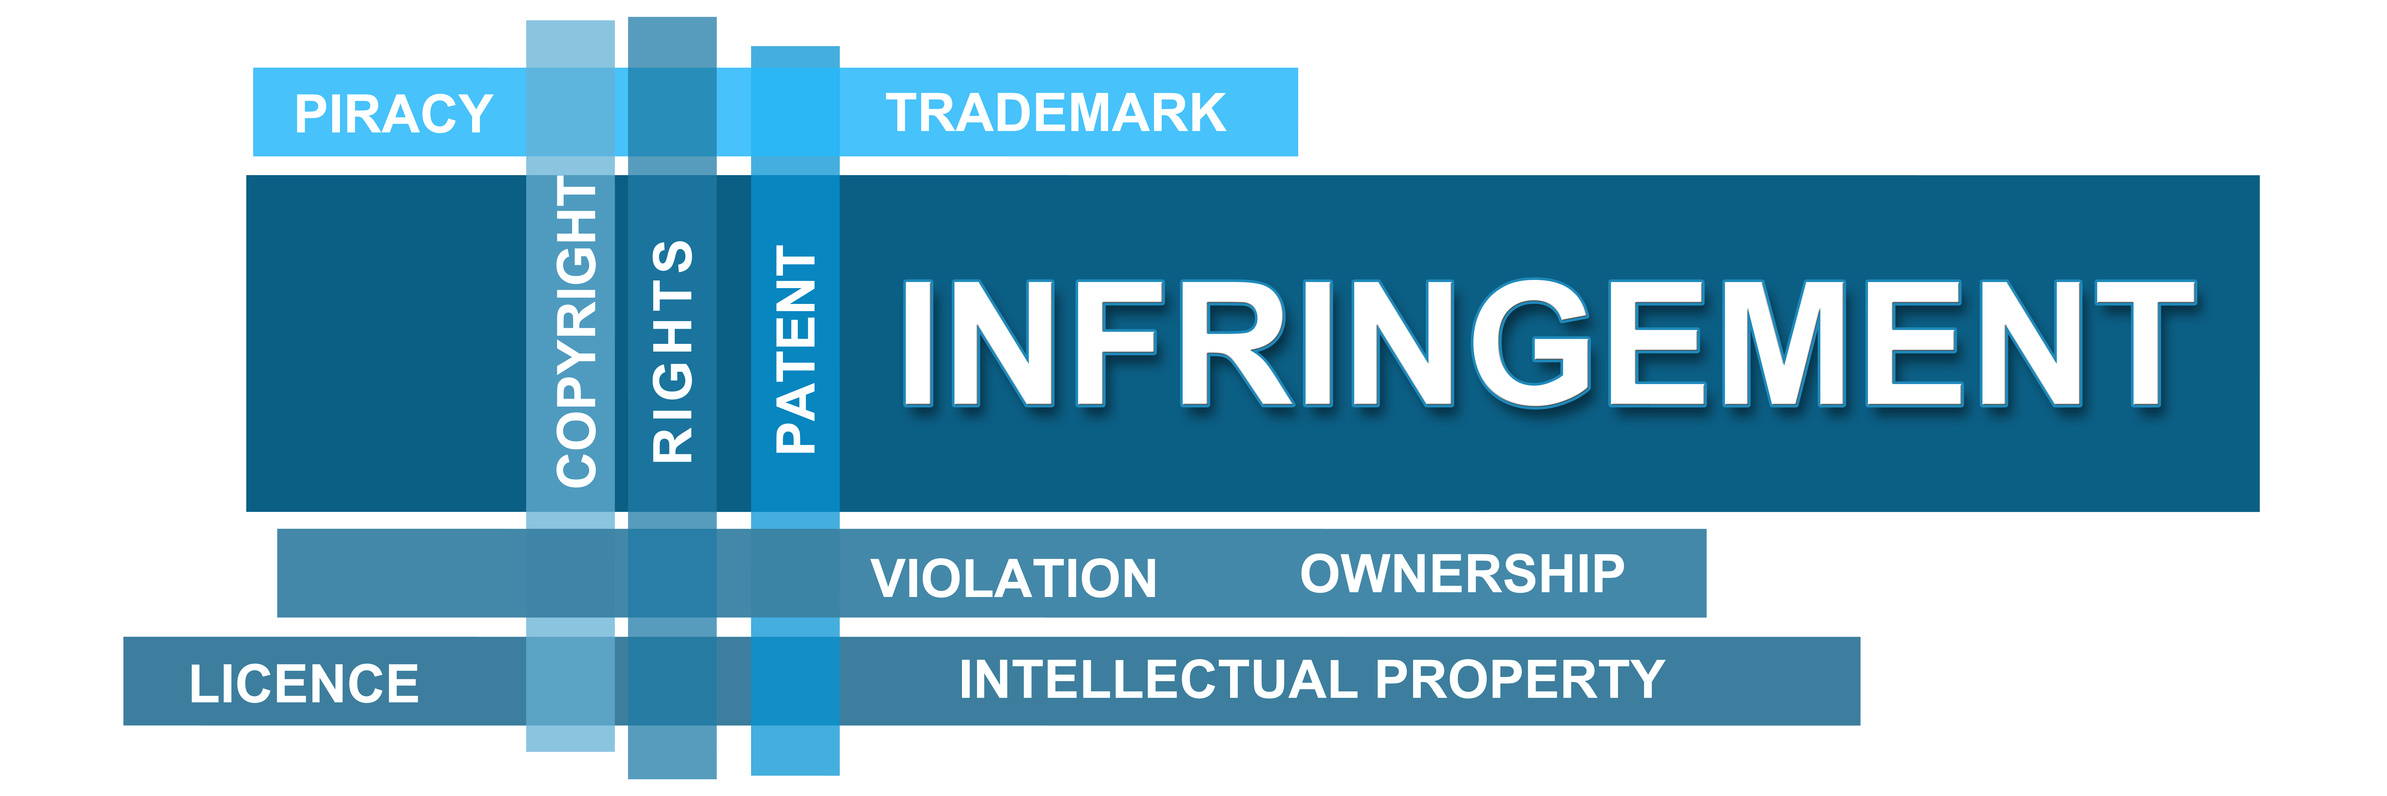 intellectual property cases